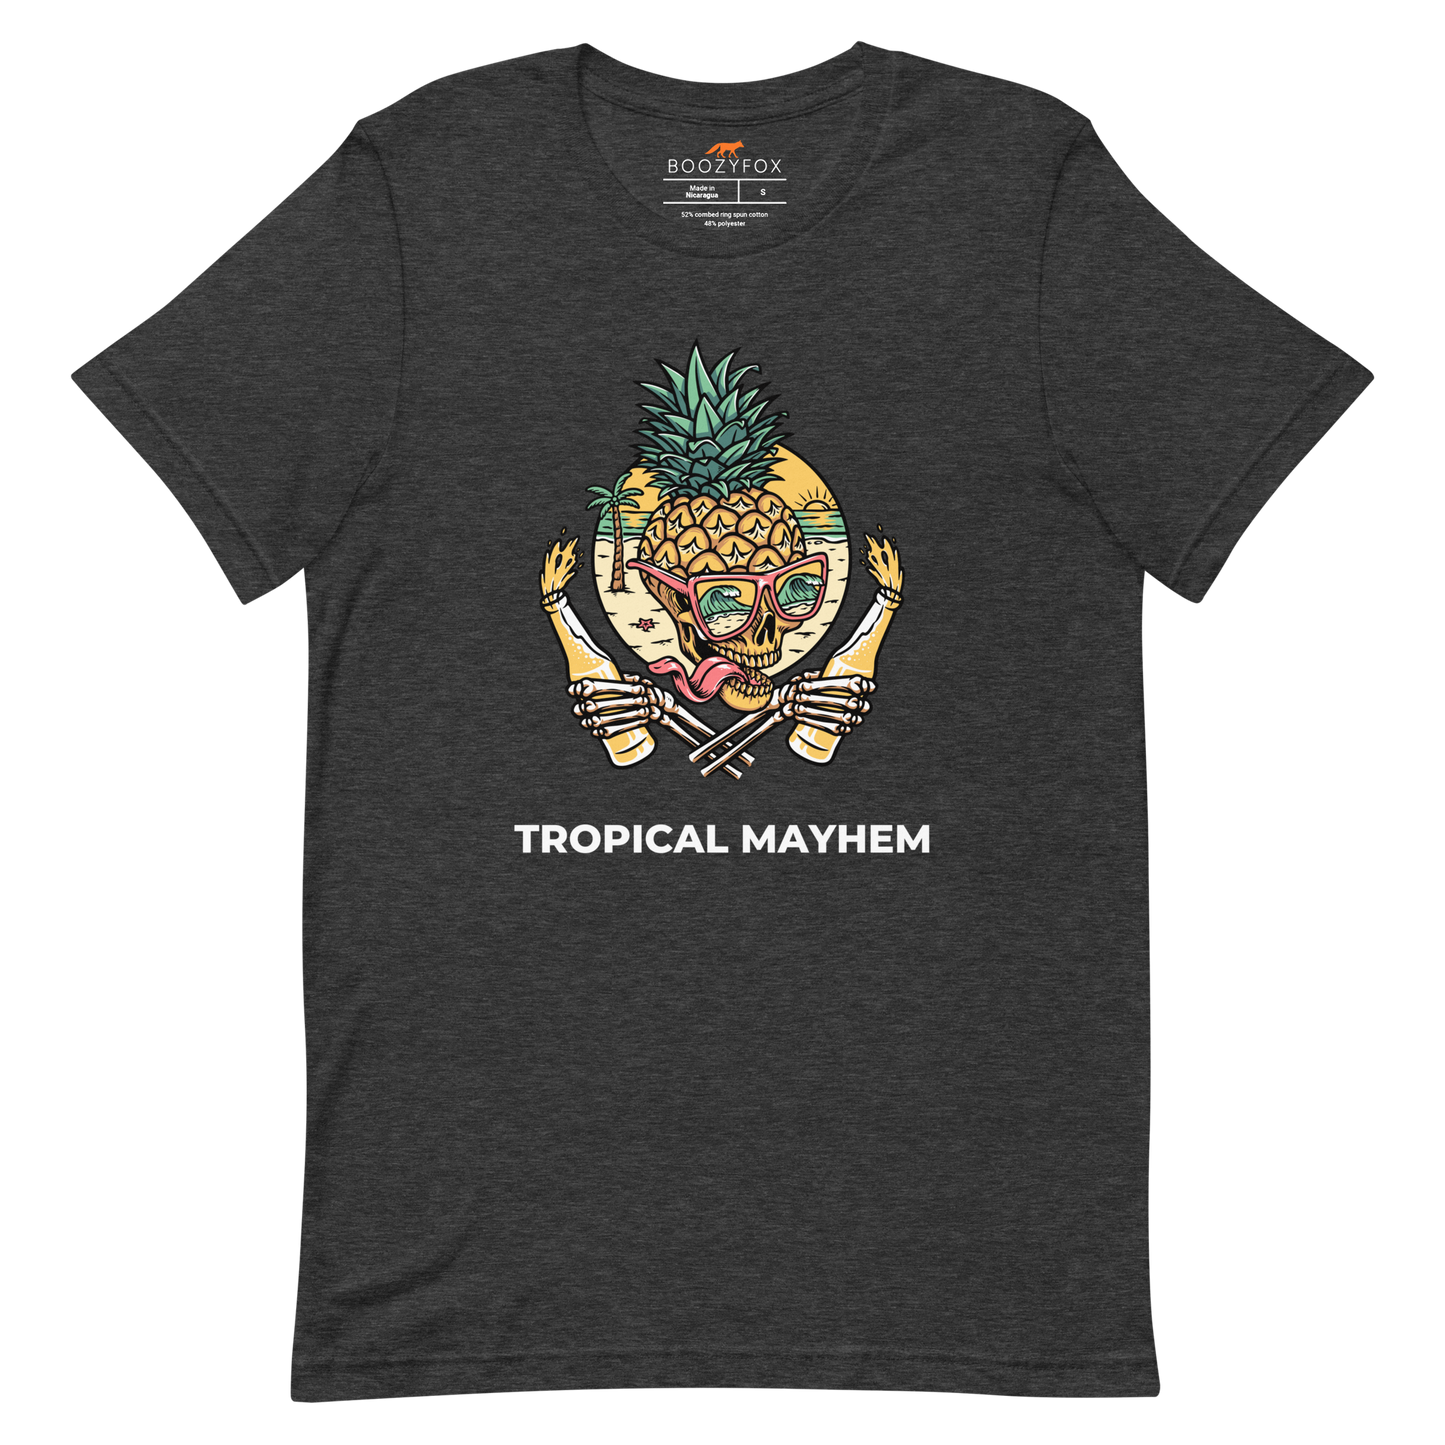 Dark Grey Heather Premium Tropical Mayhem Tee featuring a Crazy Pineapple Skull graphic on the chest - Funny Graphic Pineapple Tees - Boozy Fox